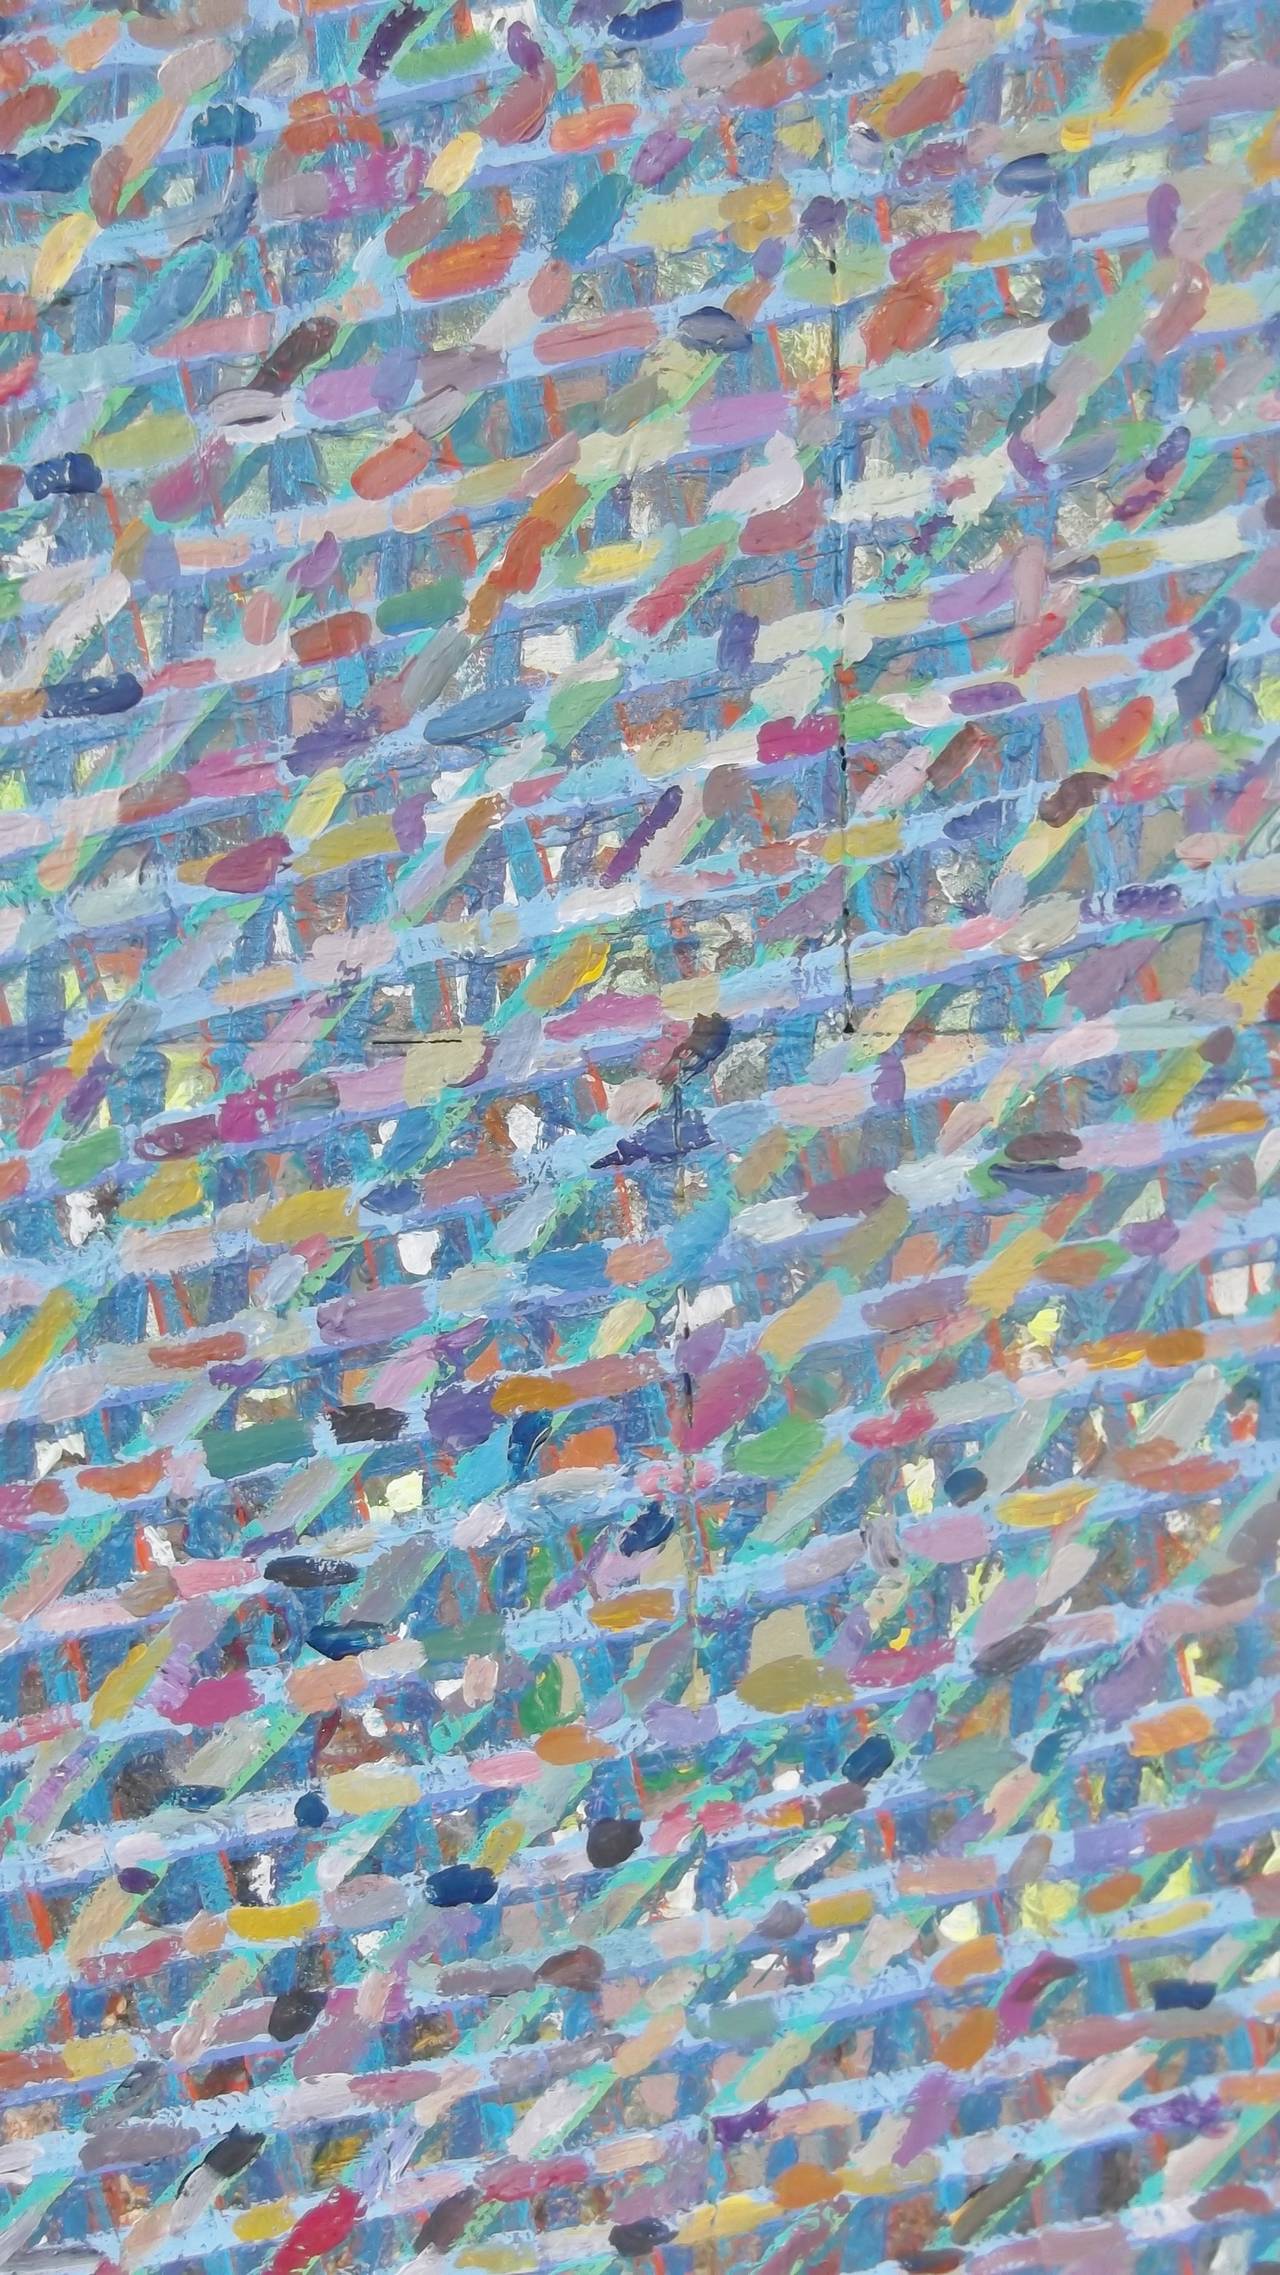 A large oil on canvas Artist-signed John David O'Shaughnessy, 2010.
Layered color and texture in a Jackson Pollack inspired abstract.
This painting is unframed, it is four canvases put together to make one large canvas.
Measures: 42 x 34 large.